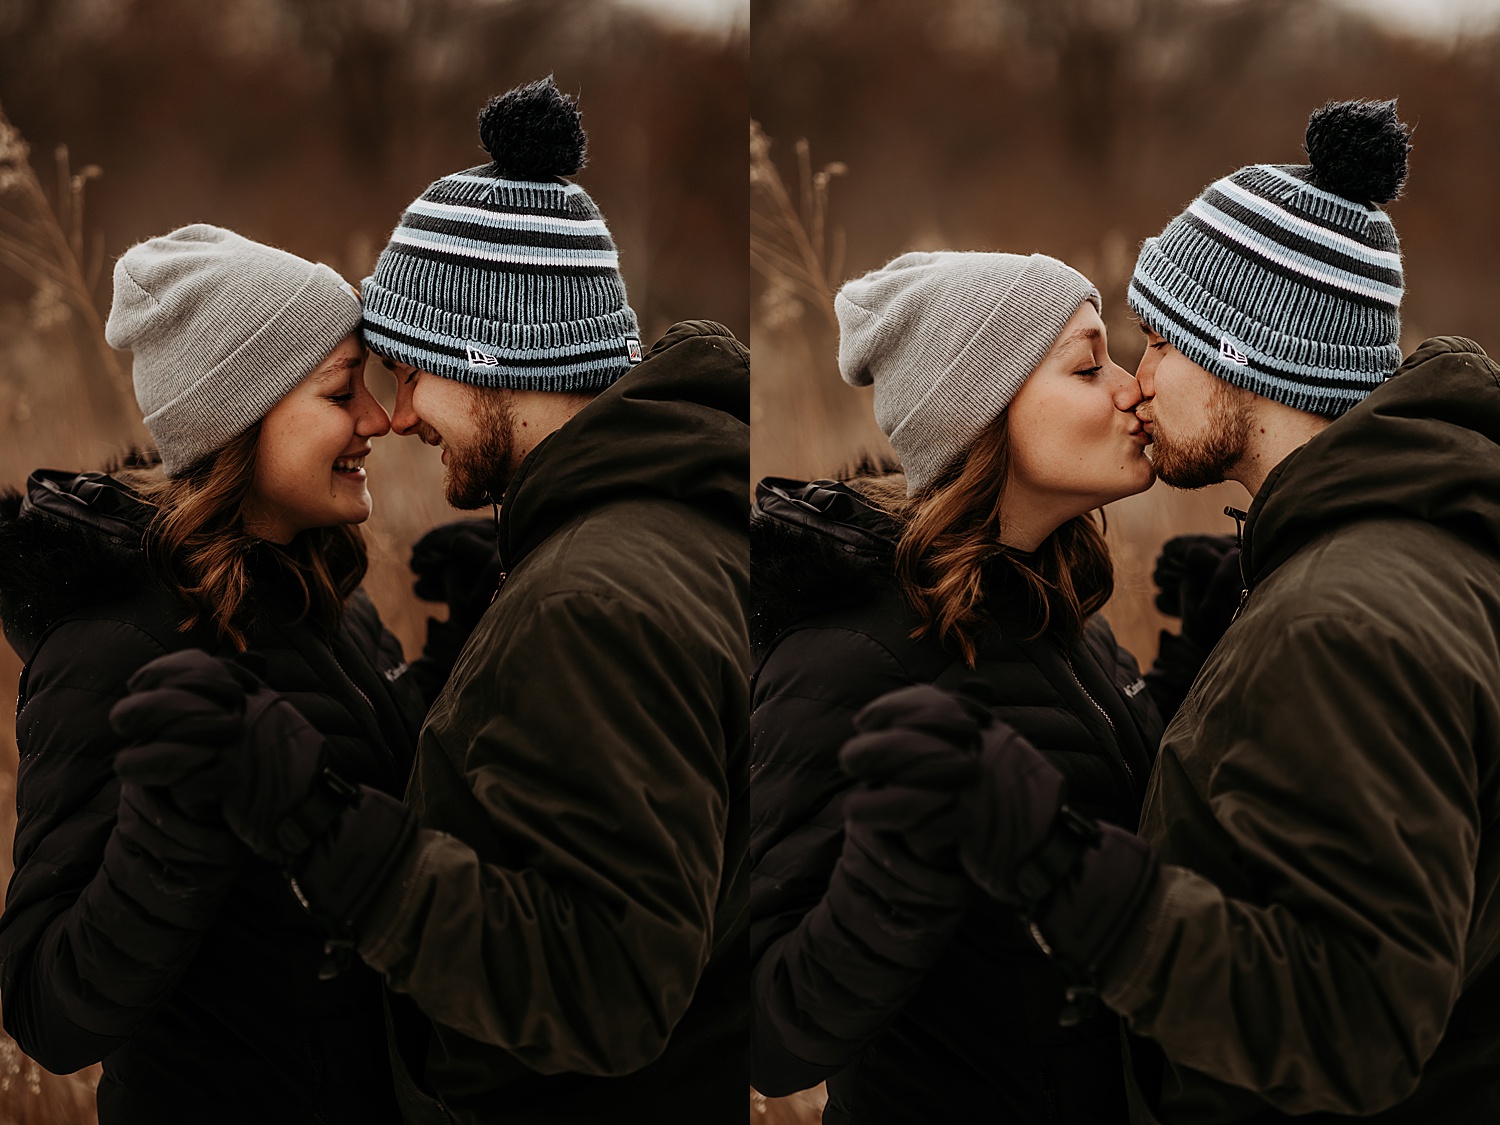 Engaged couple kids while wearing beanies and winter coats during a snowy session